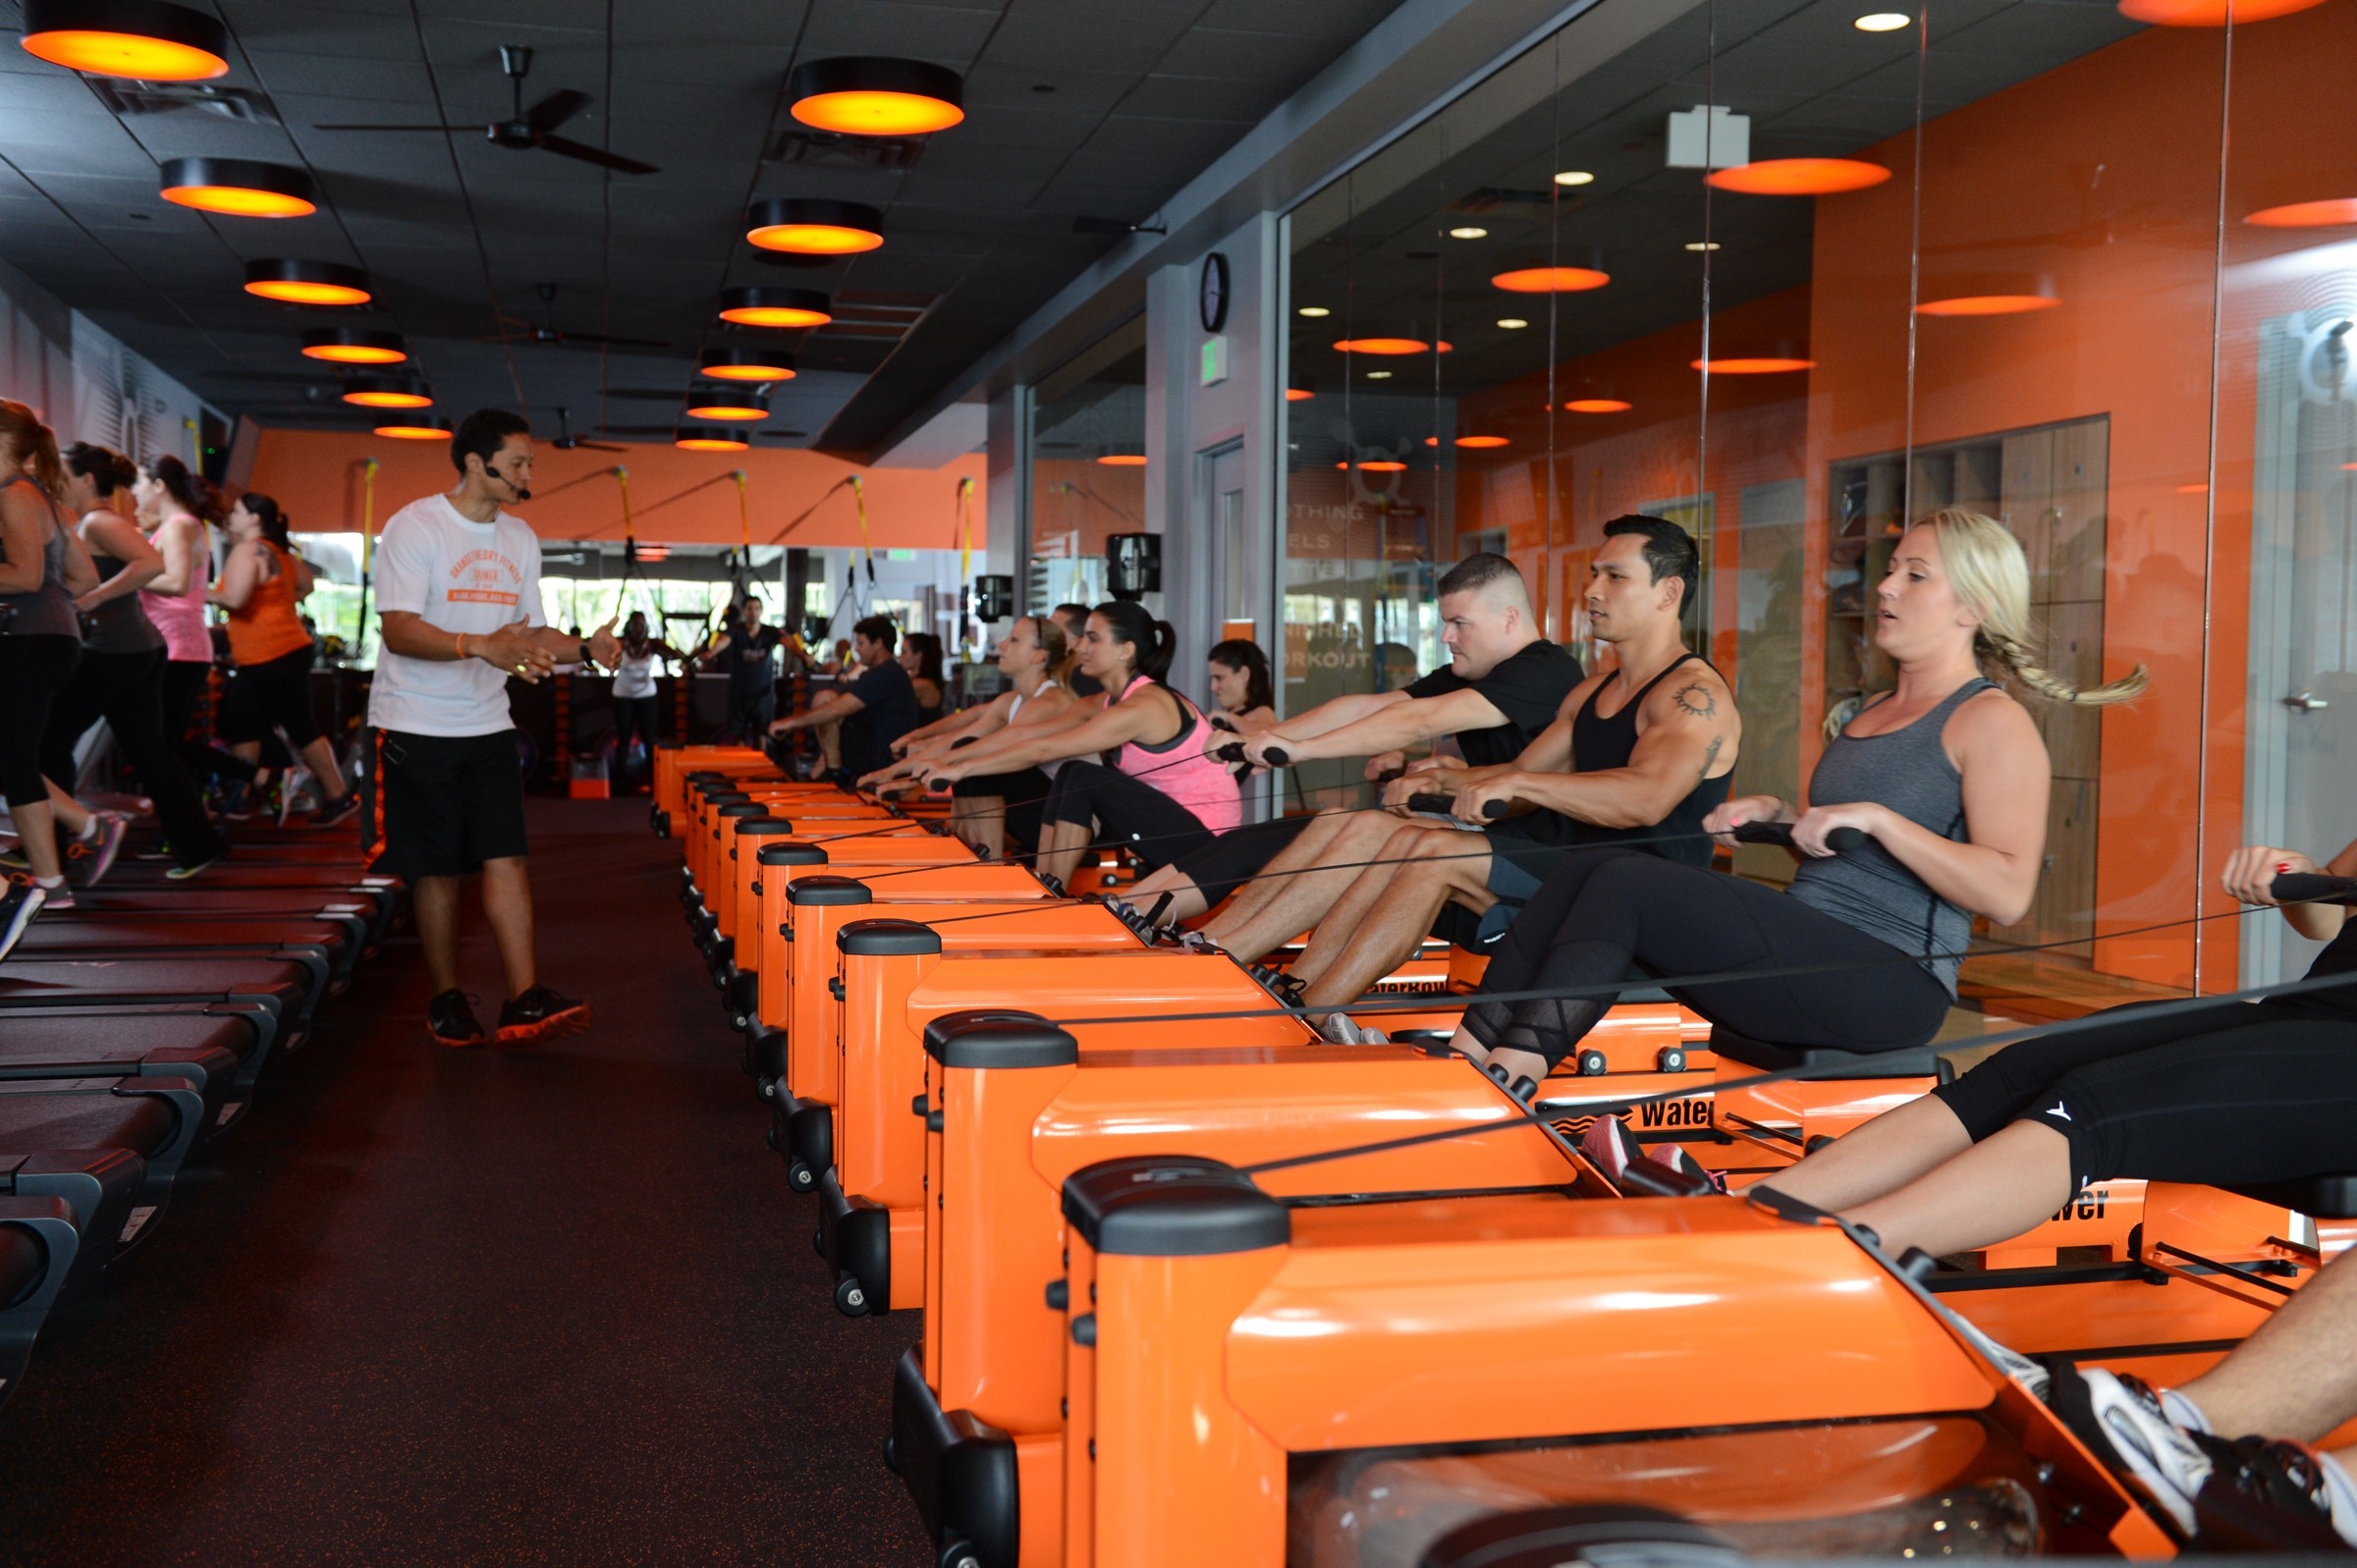 Trainers guide participants through a 60-minute workout broken down into intervals of cardiovascular and strength training. Each participant is given a heartrate monitor to wear that they and the trainers can visually monitor via one of the several TV screens located in the fitness studio.